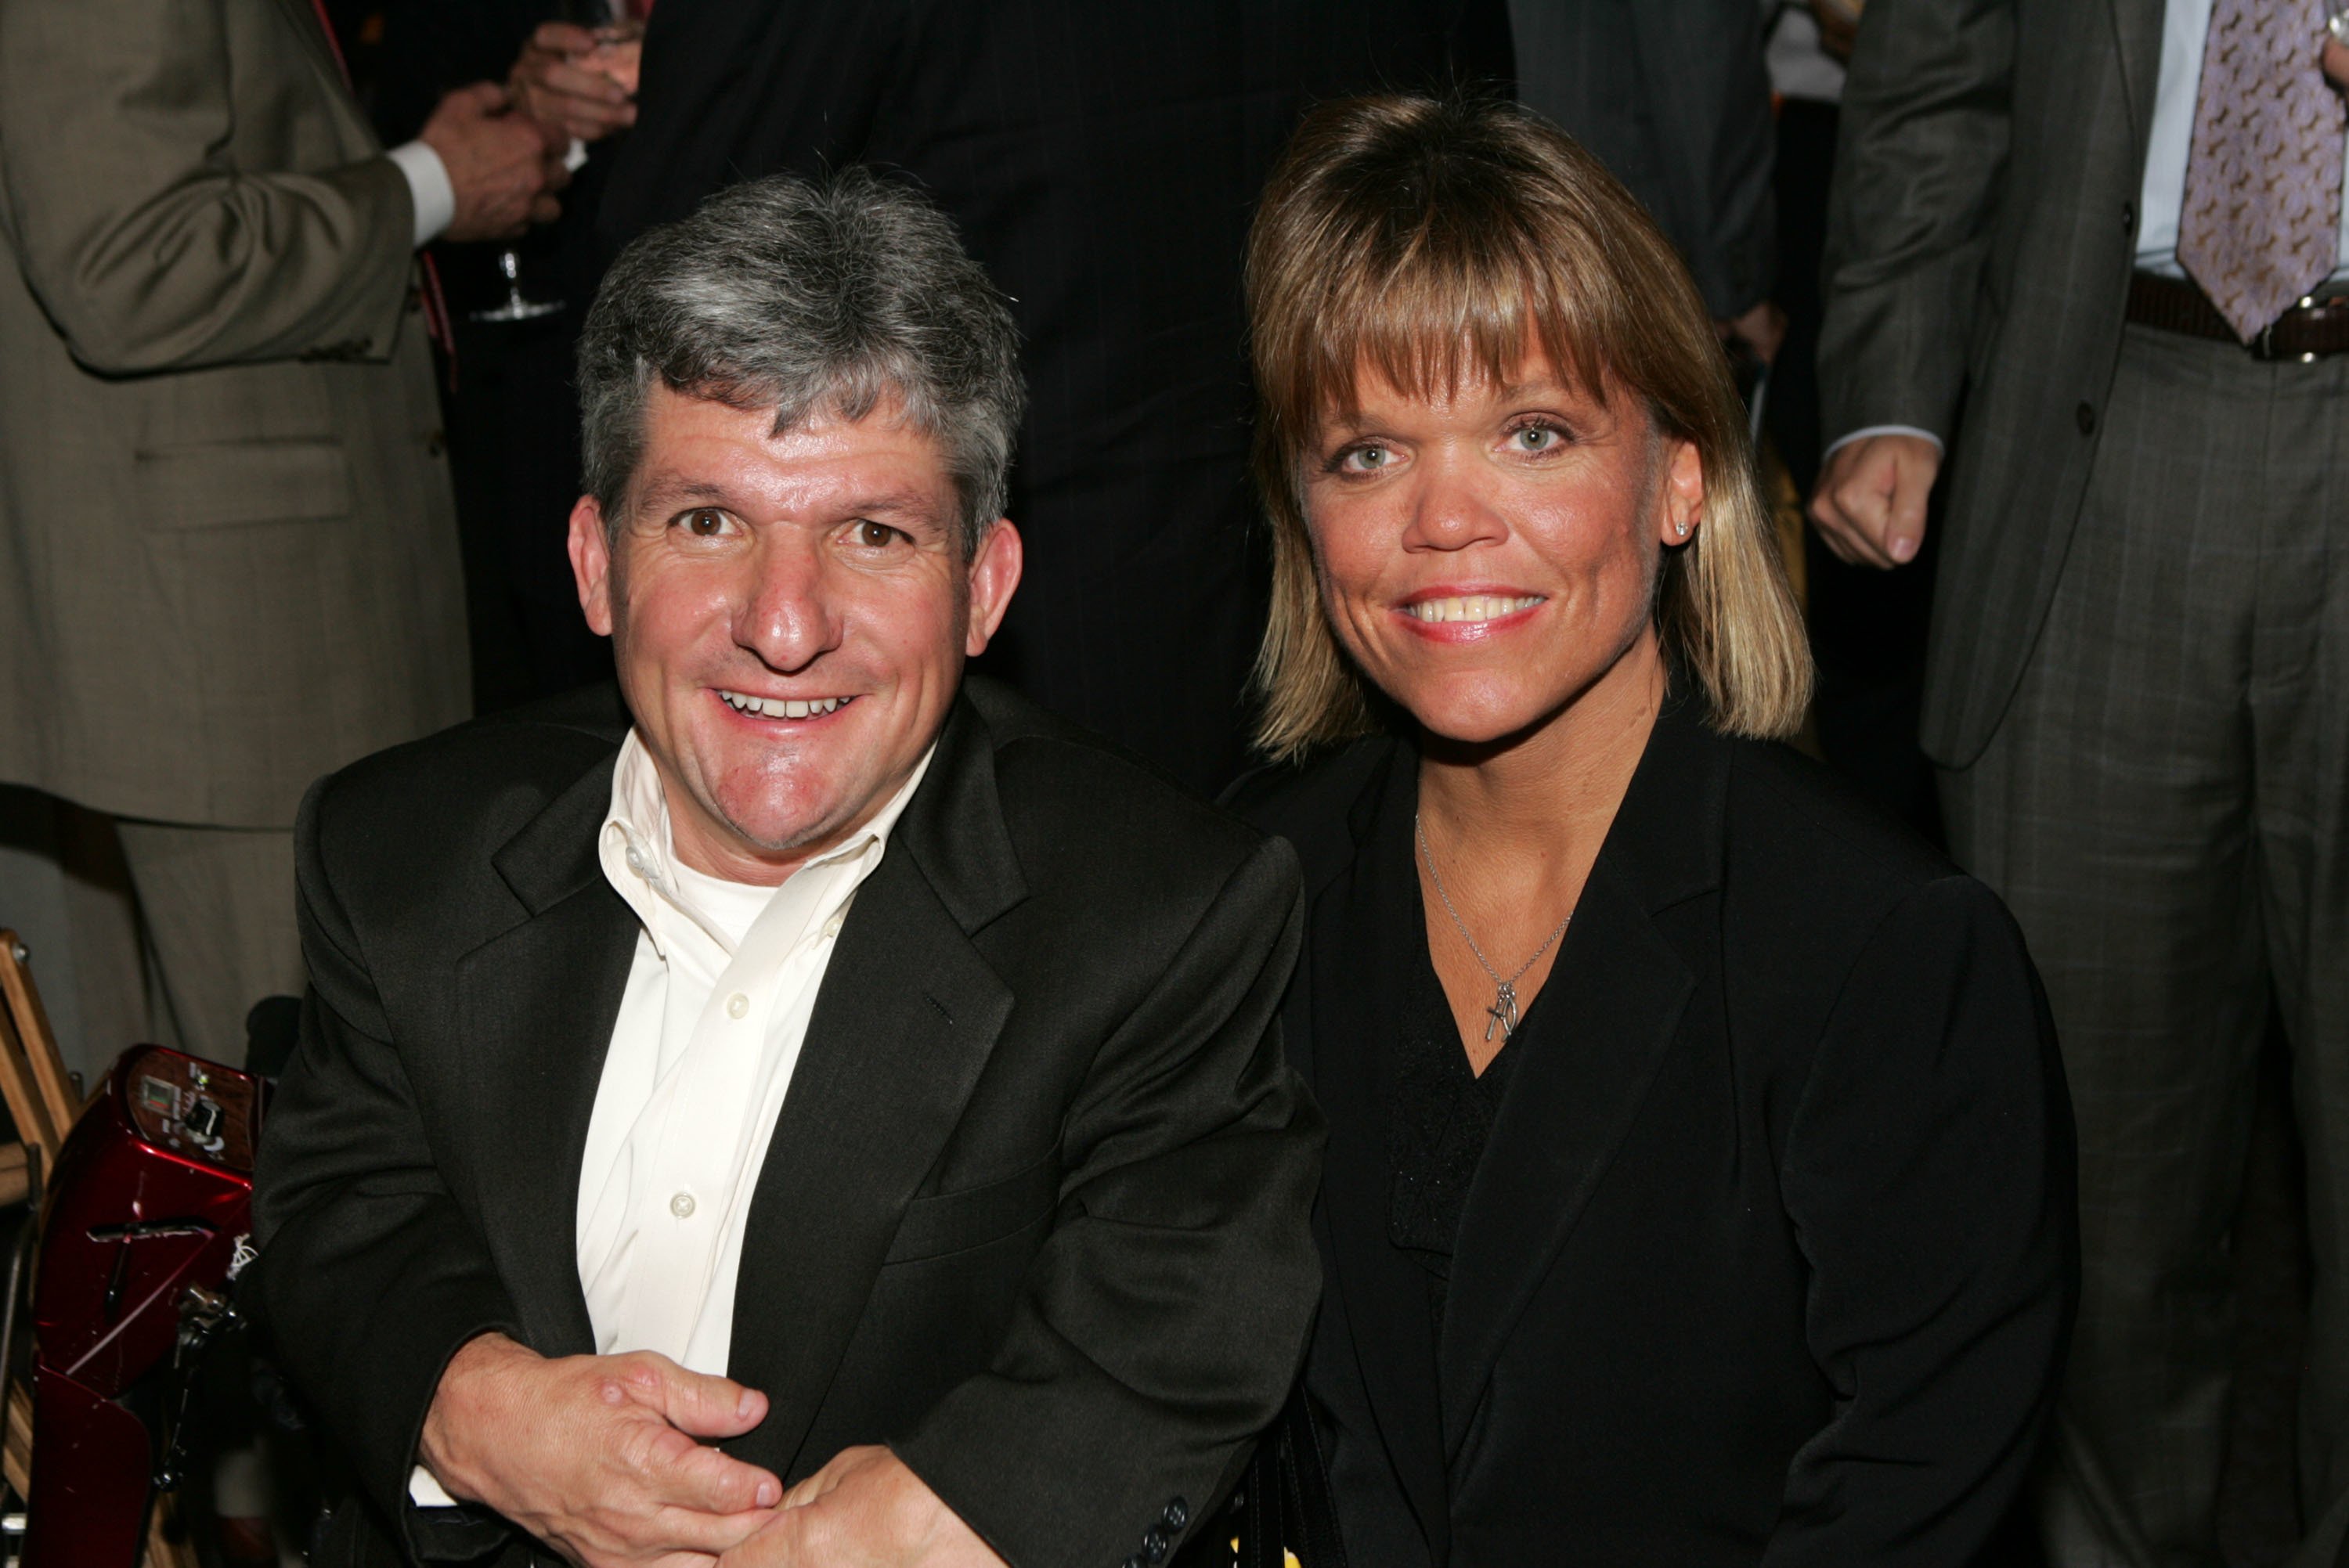 Matt and Amy Roloff attend the Discovery Upfront Presentation on April 23, 2008 in New York City.| Photo: Getty Images